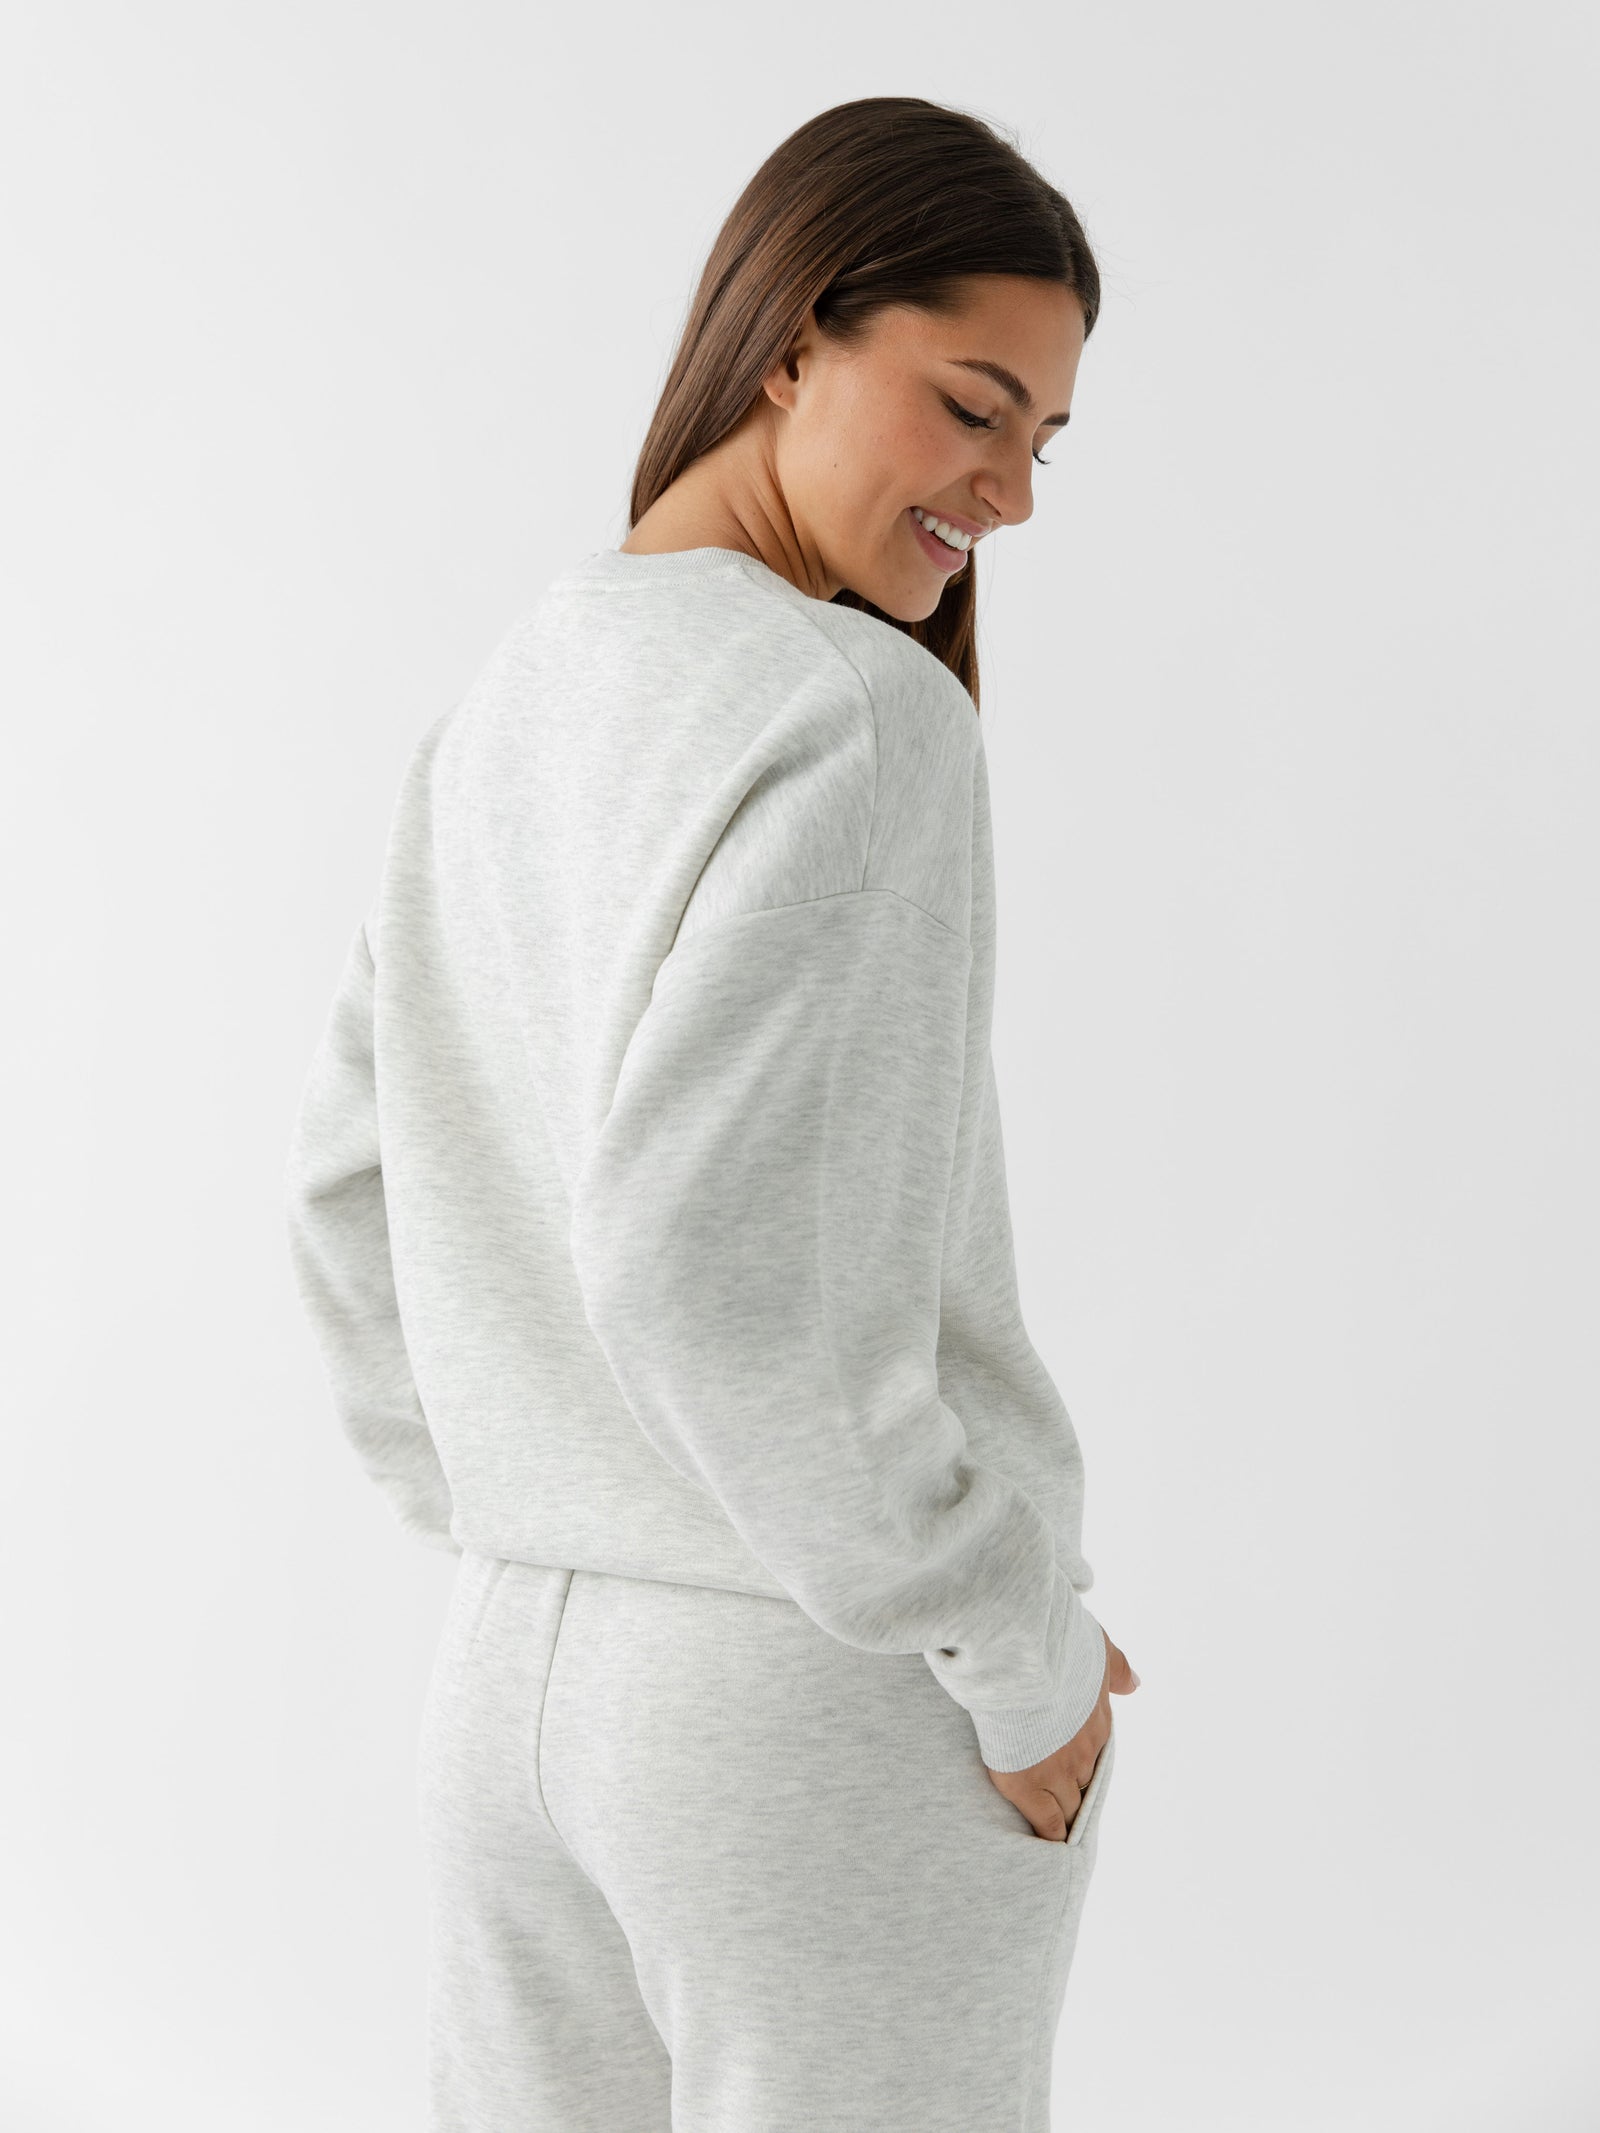 Back of woman wearing heather grey cityscape set with white background 